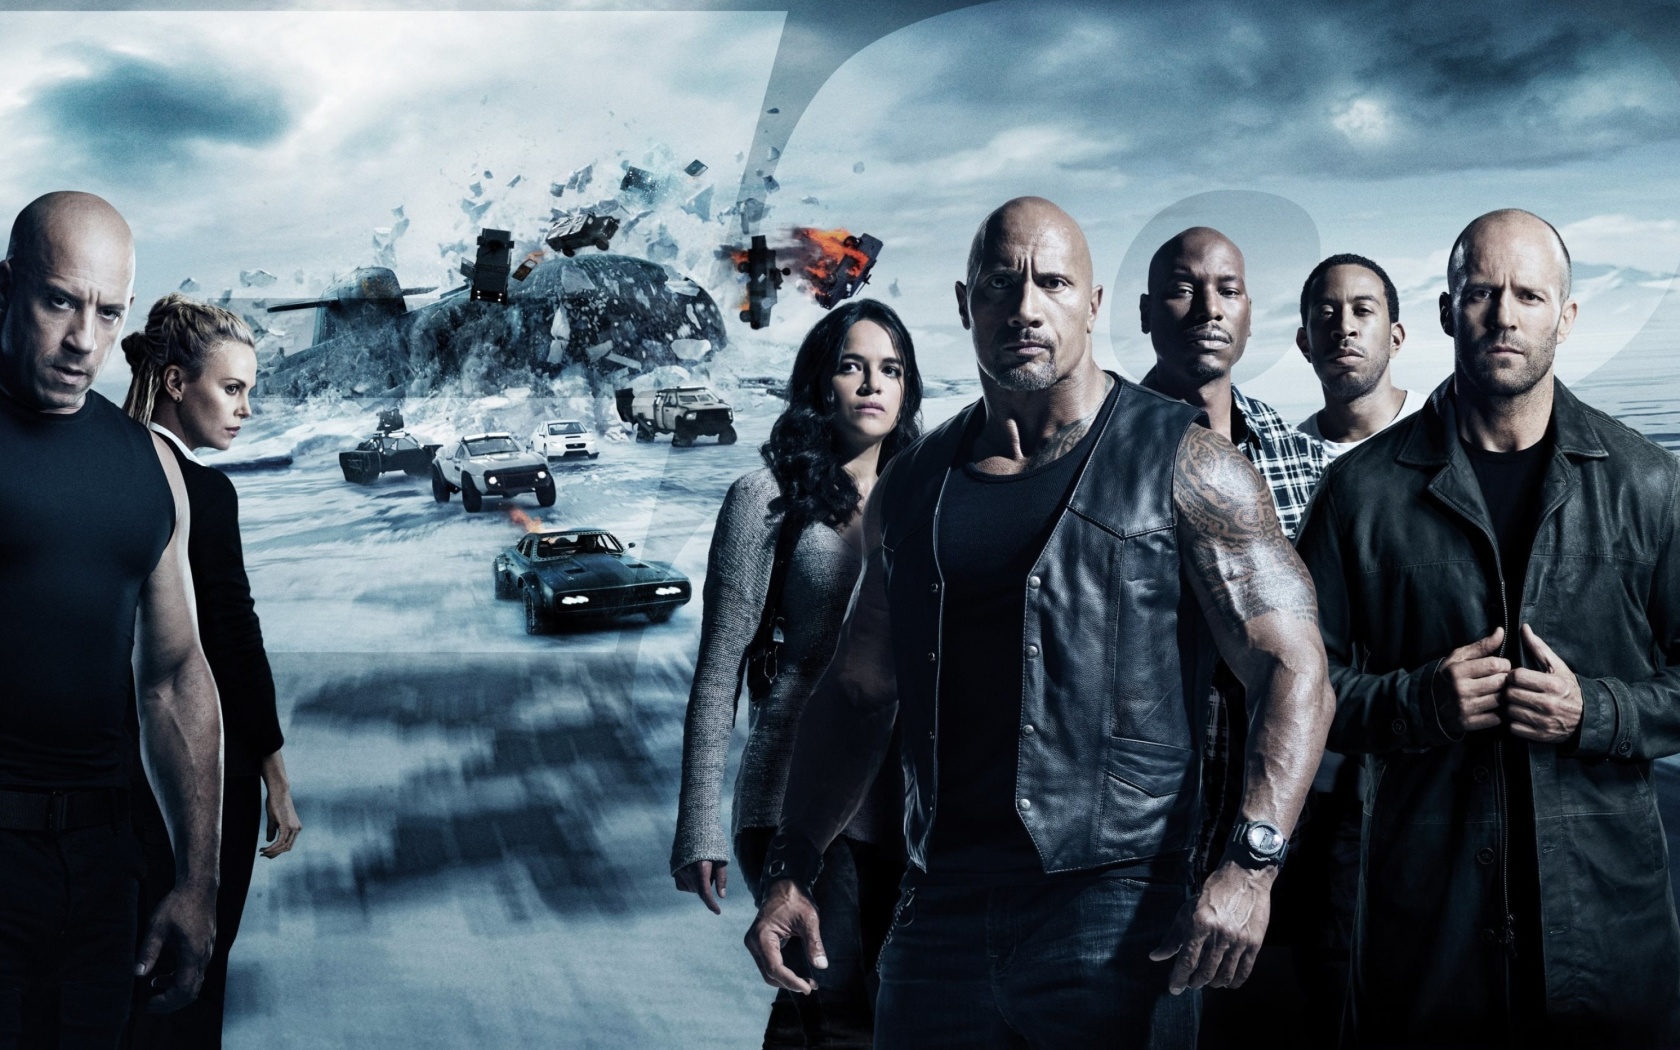 Das The Fate of the Furious with Vin Diesel, Dwayne Johnson, Charlize Theron Wallpaper 1680x1050